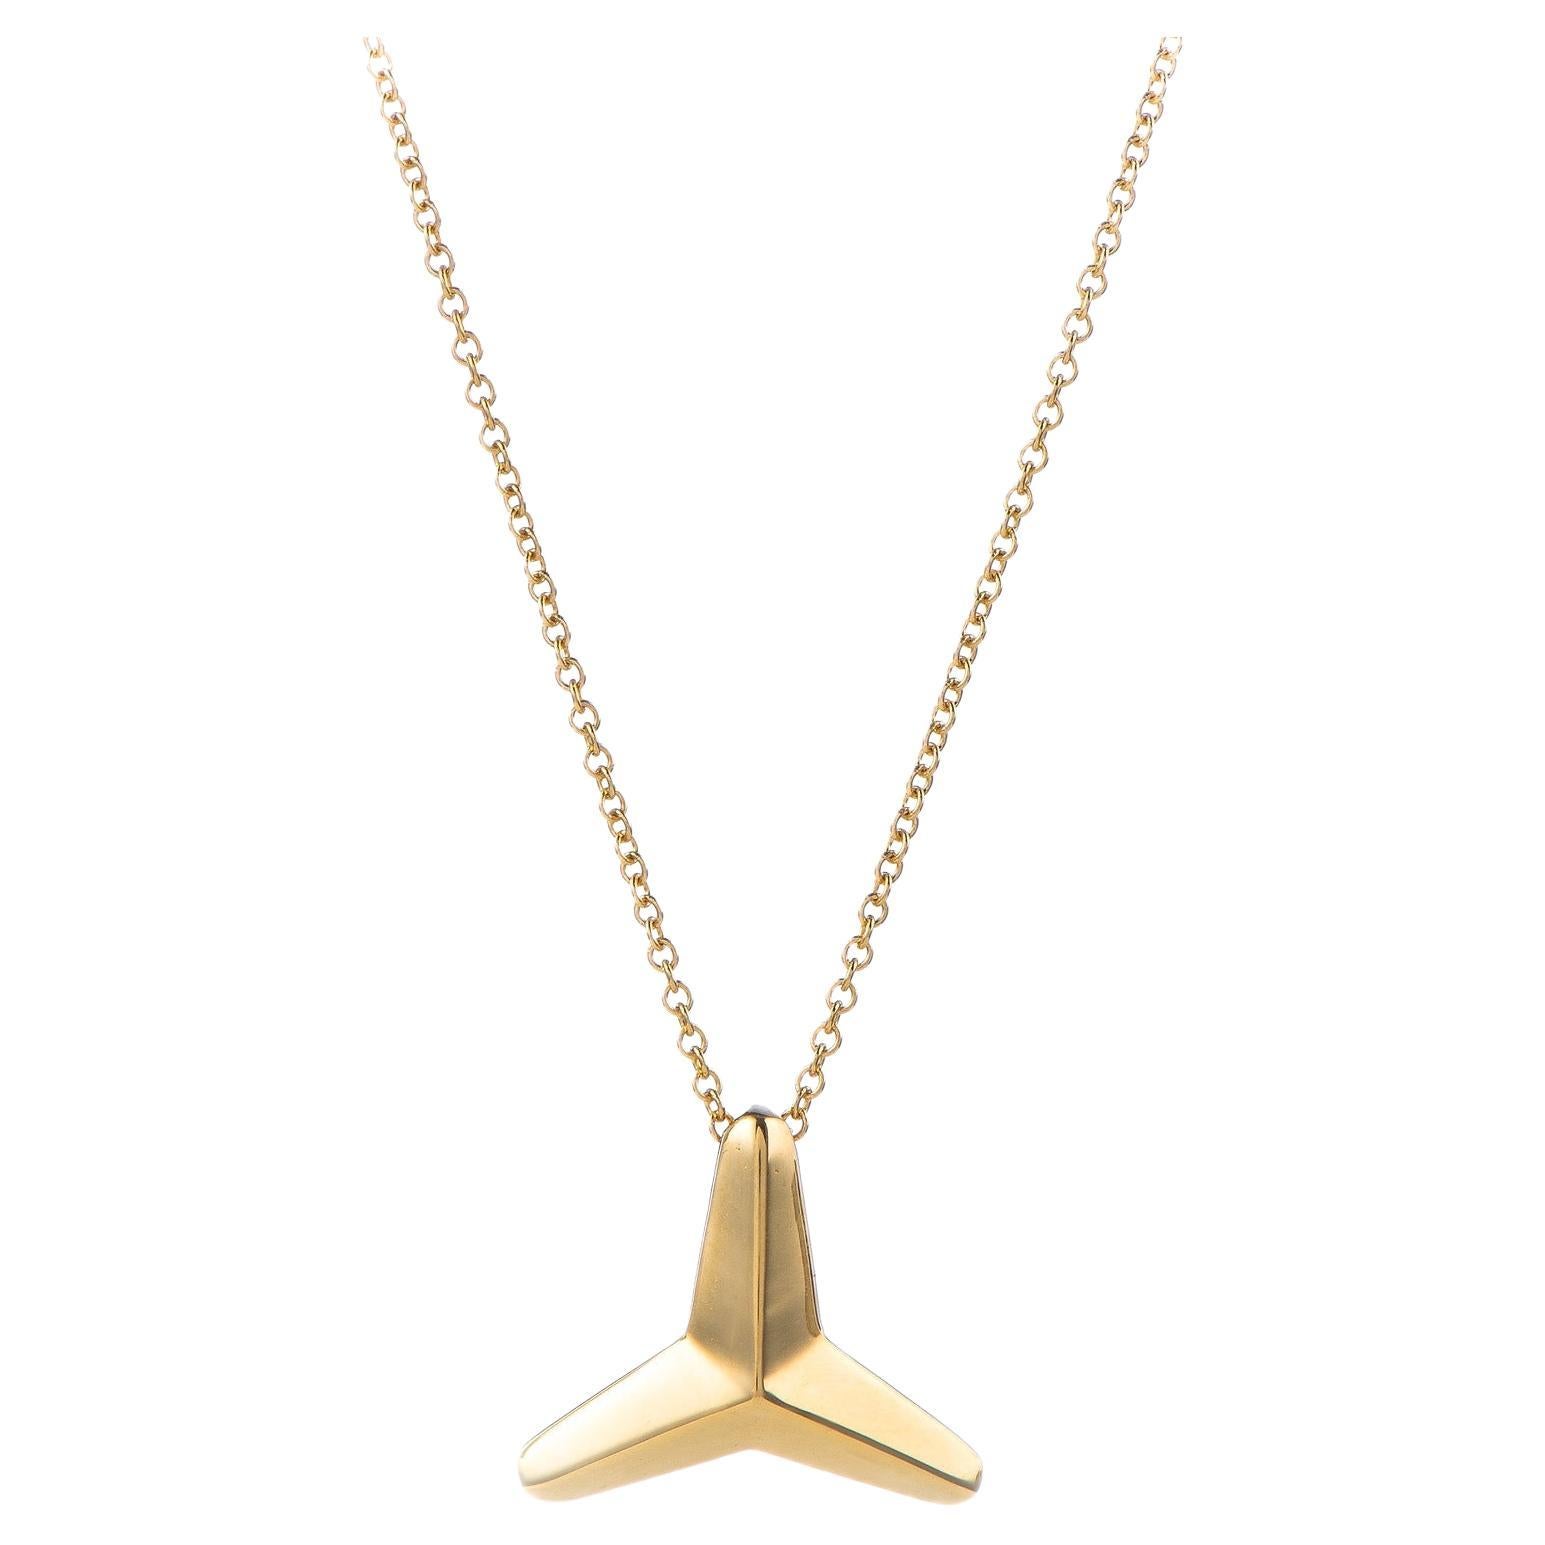 Maria Kotsoni Contemporary 18k Gold Three Pointed Star Chain Pendant Necklace